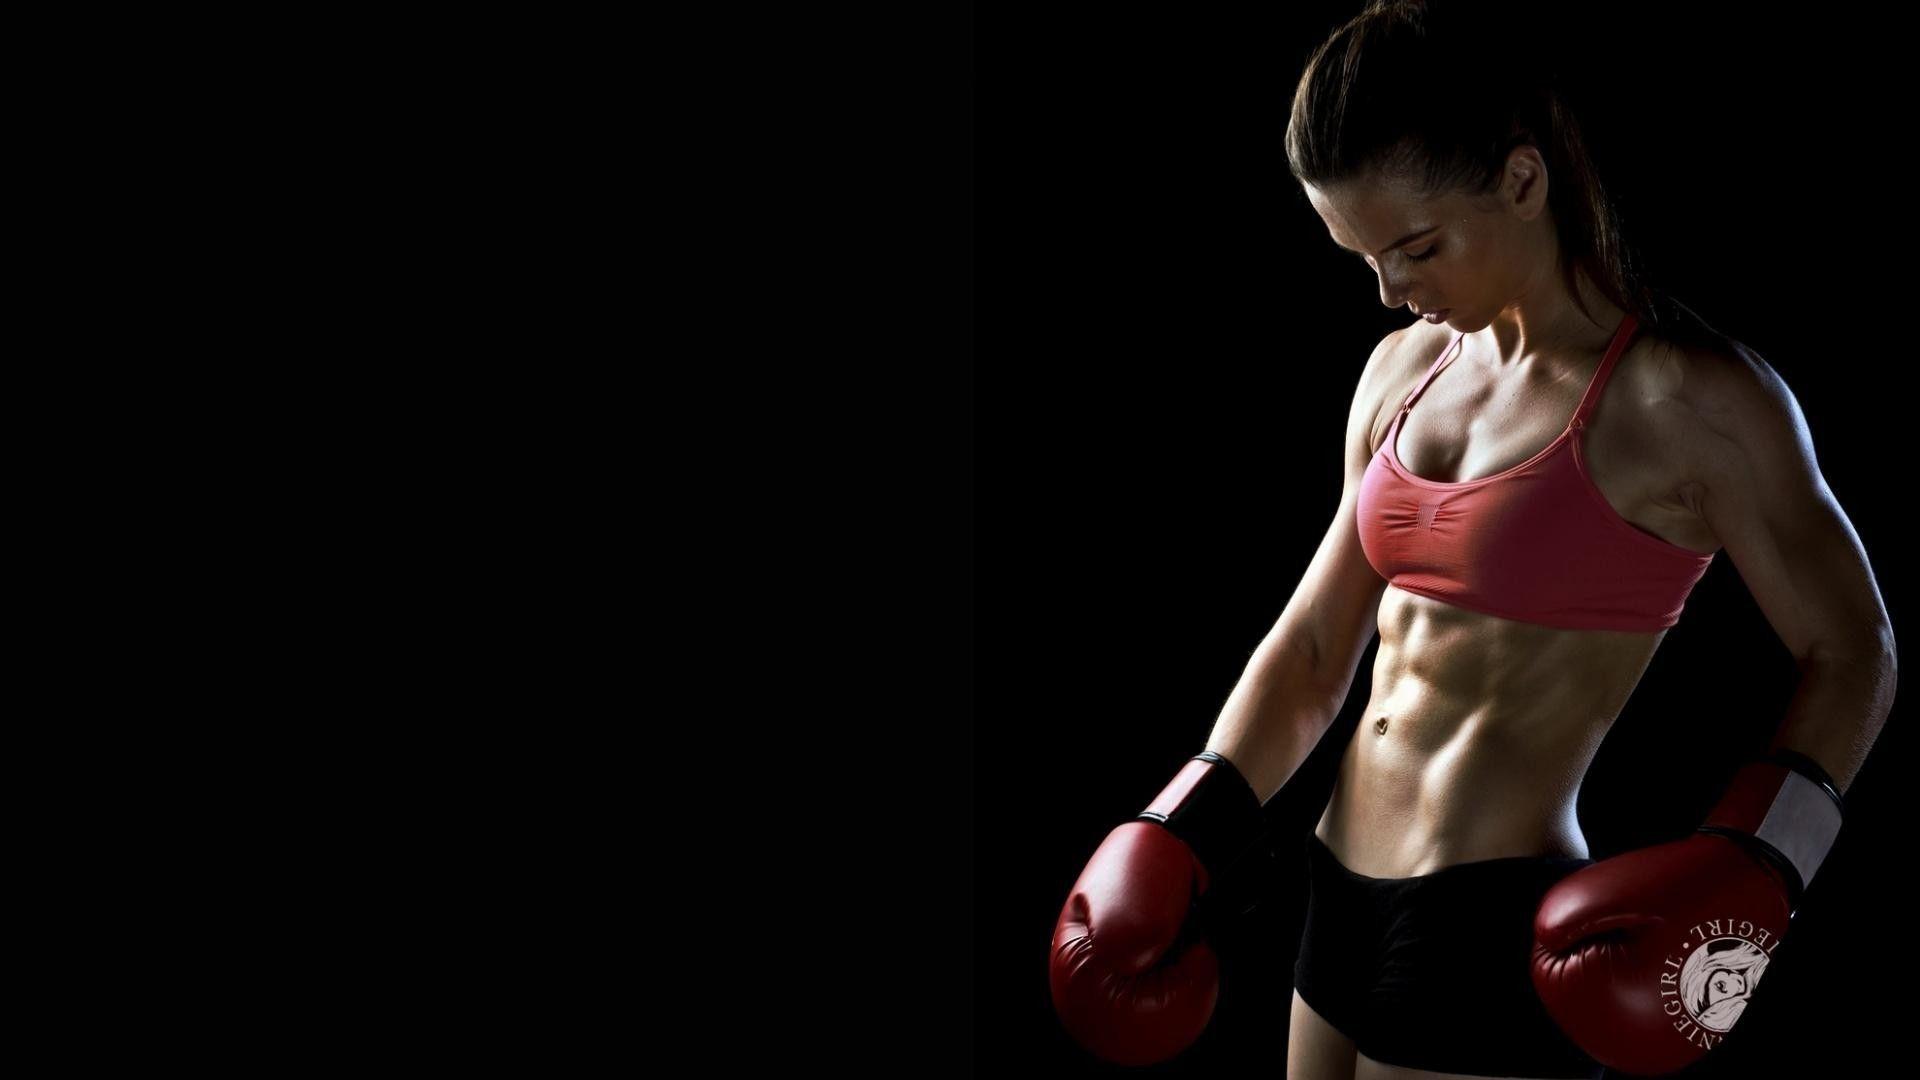 Boxing Girl Wallpapers - Top Free Boxing Girl Backgrounds - WallpaperAccess